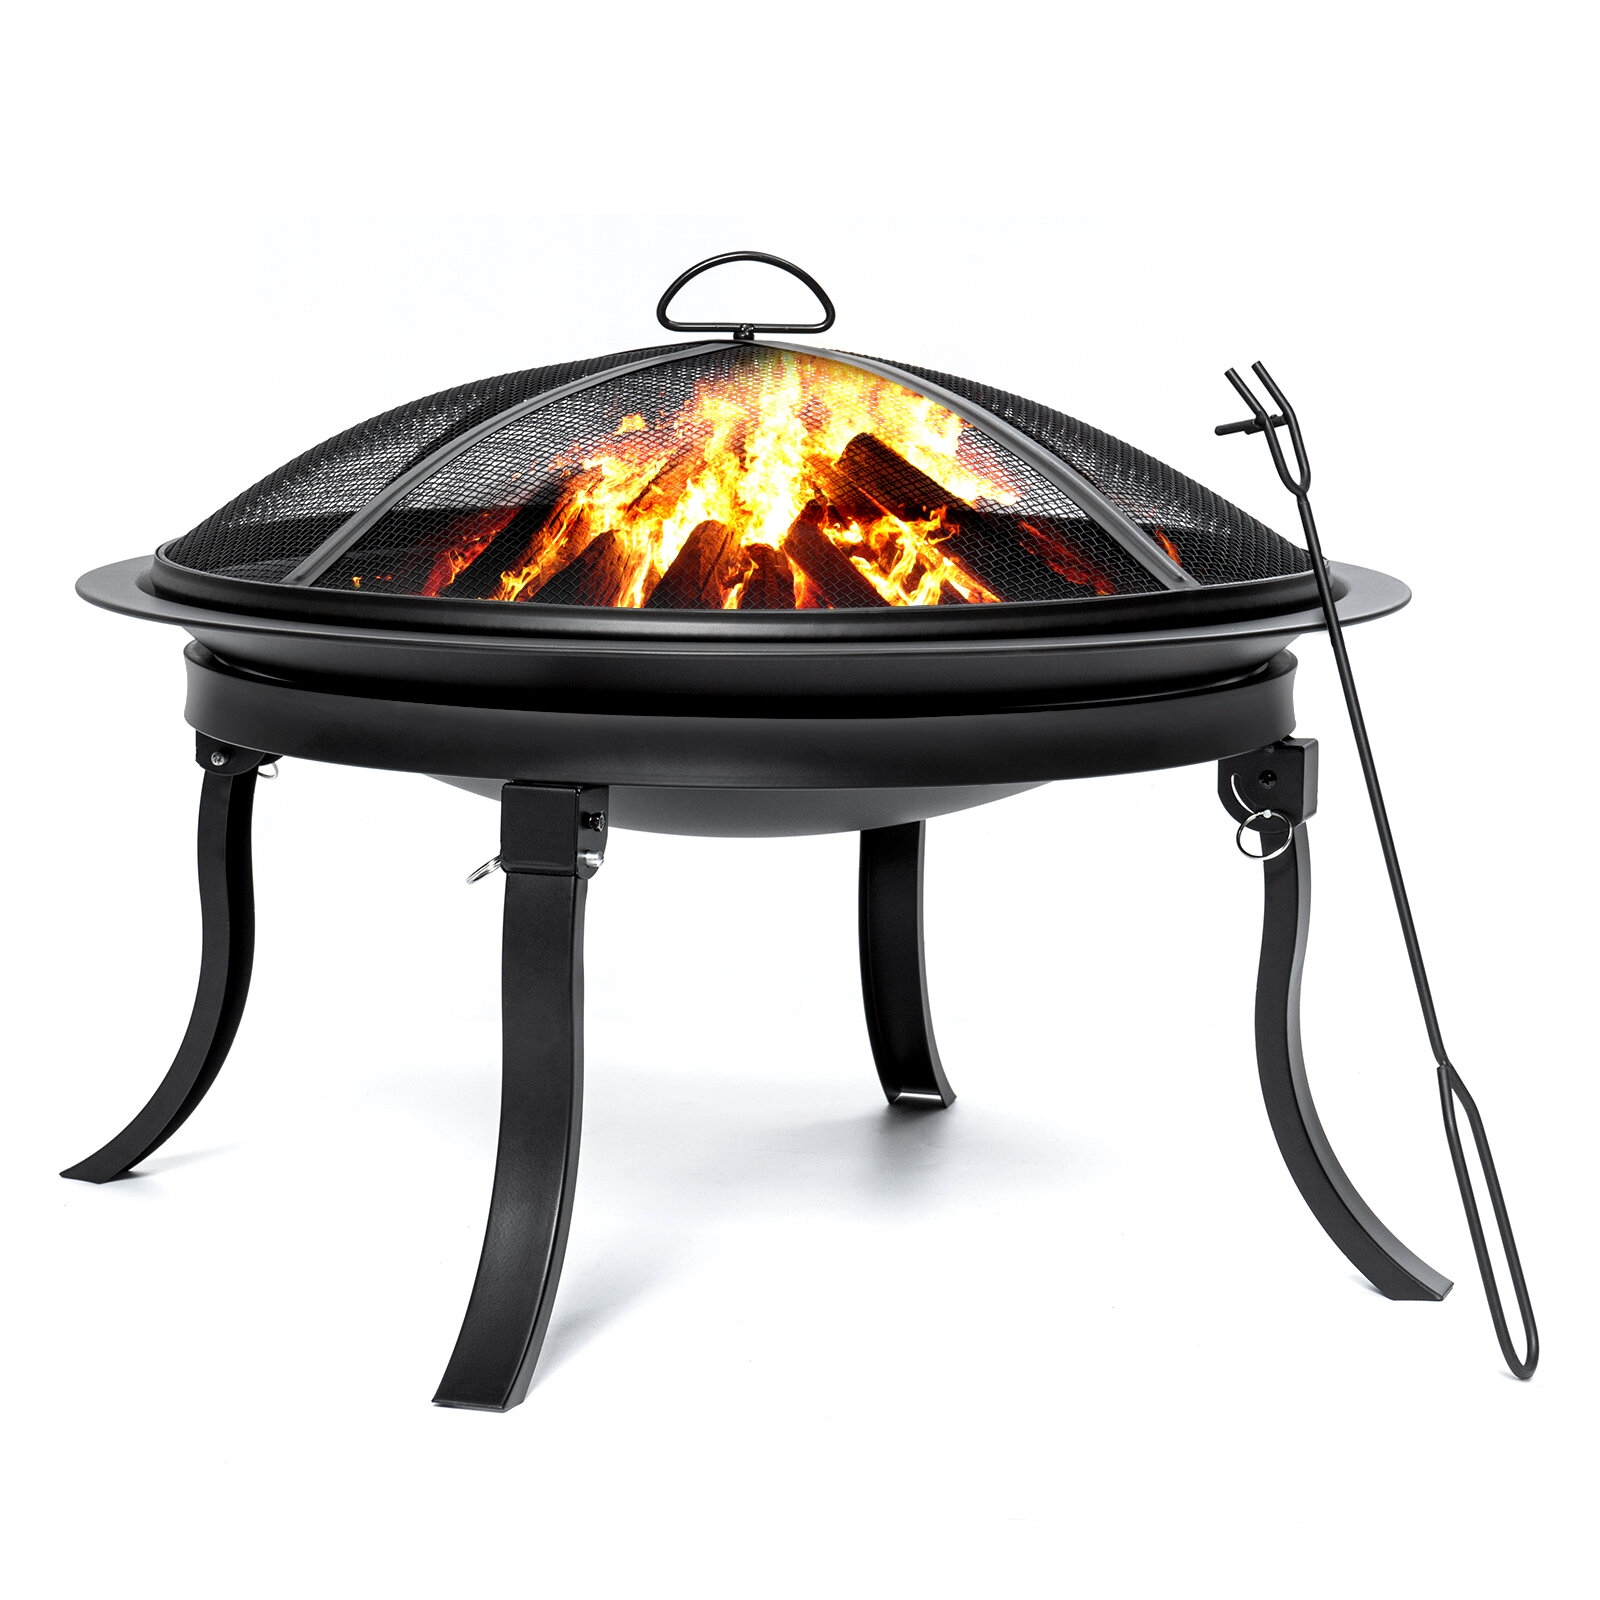 Kingso 24inch Portable Fire Pits With 4, Fire Pit 24 Inch